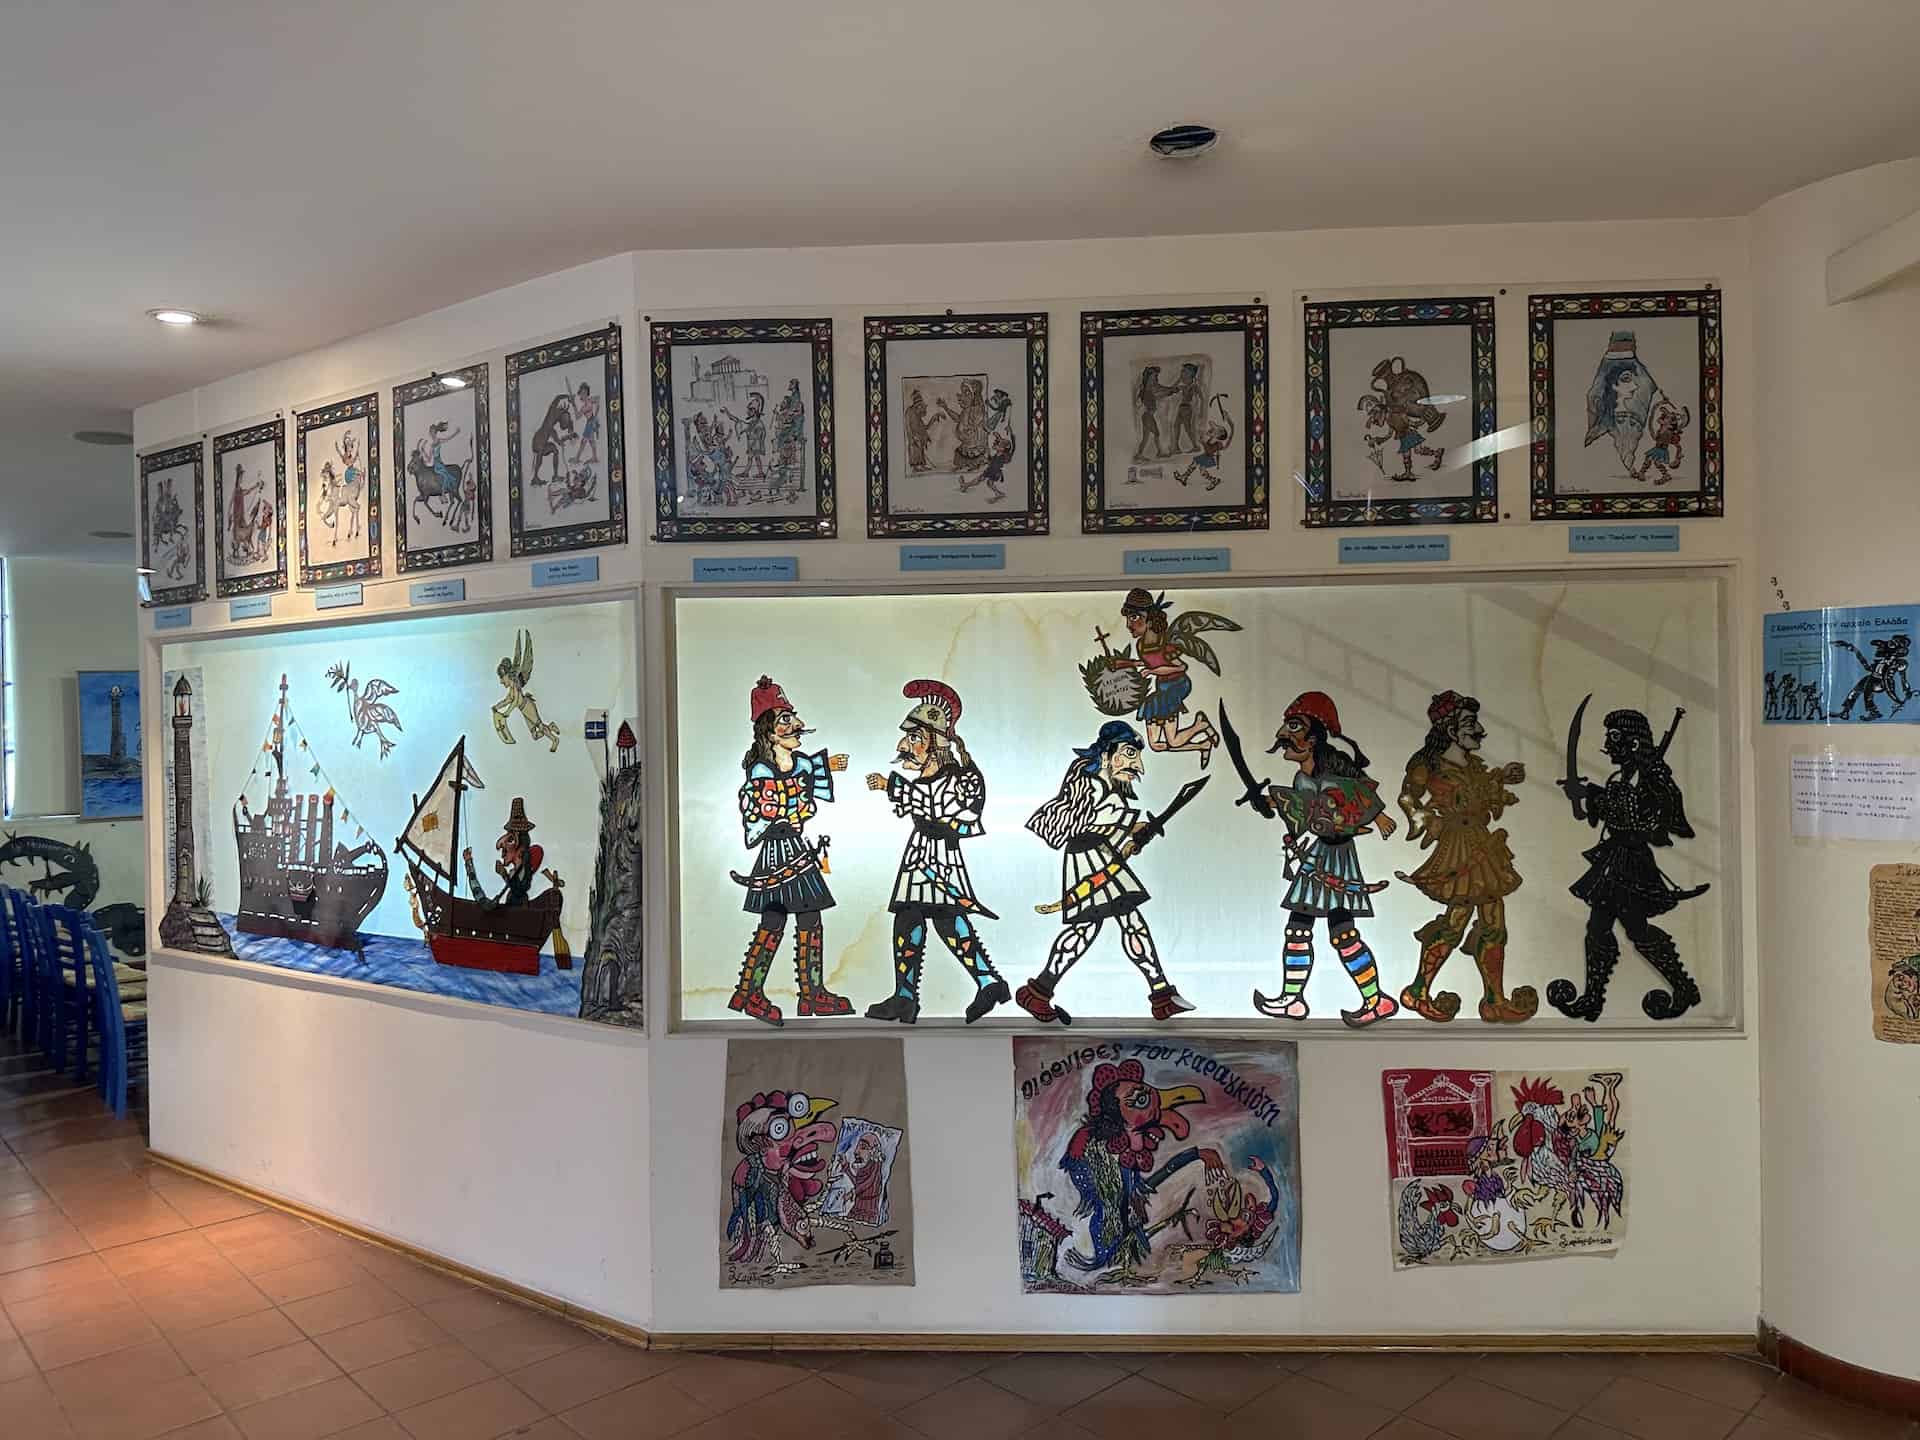 Shadow puppets at the Melina Mercouri Cultural Centre in Thiseio, Athens, Greece